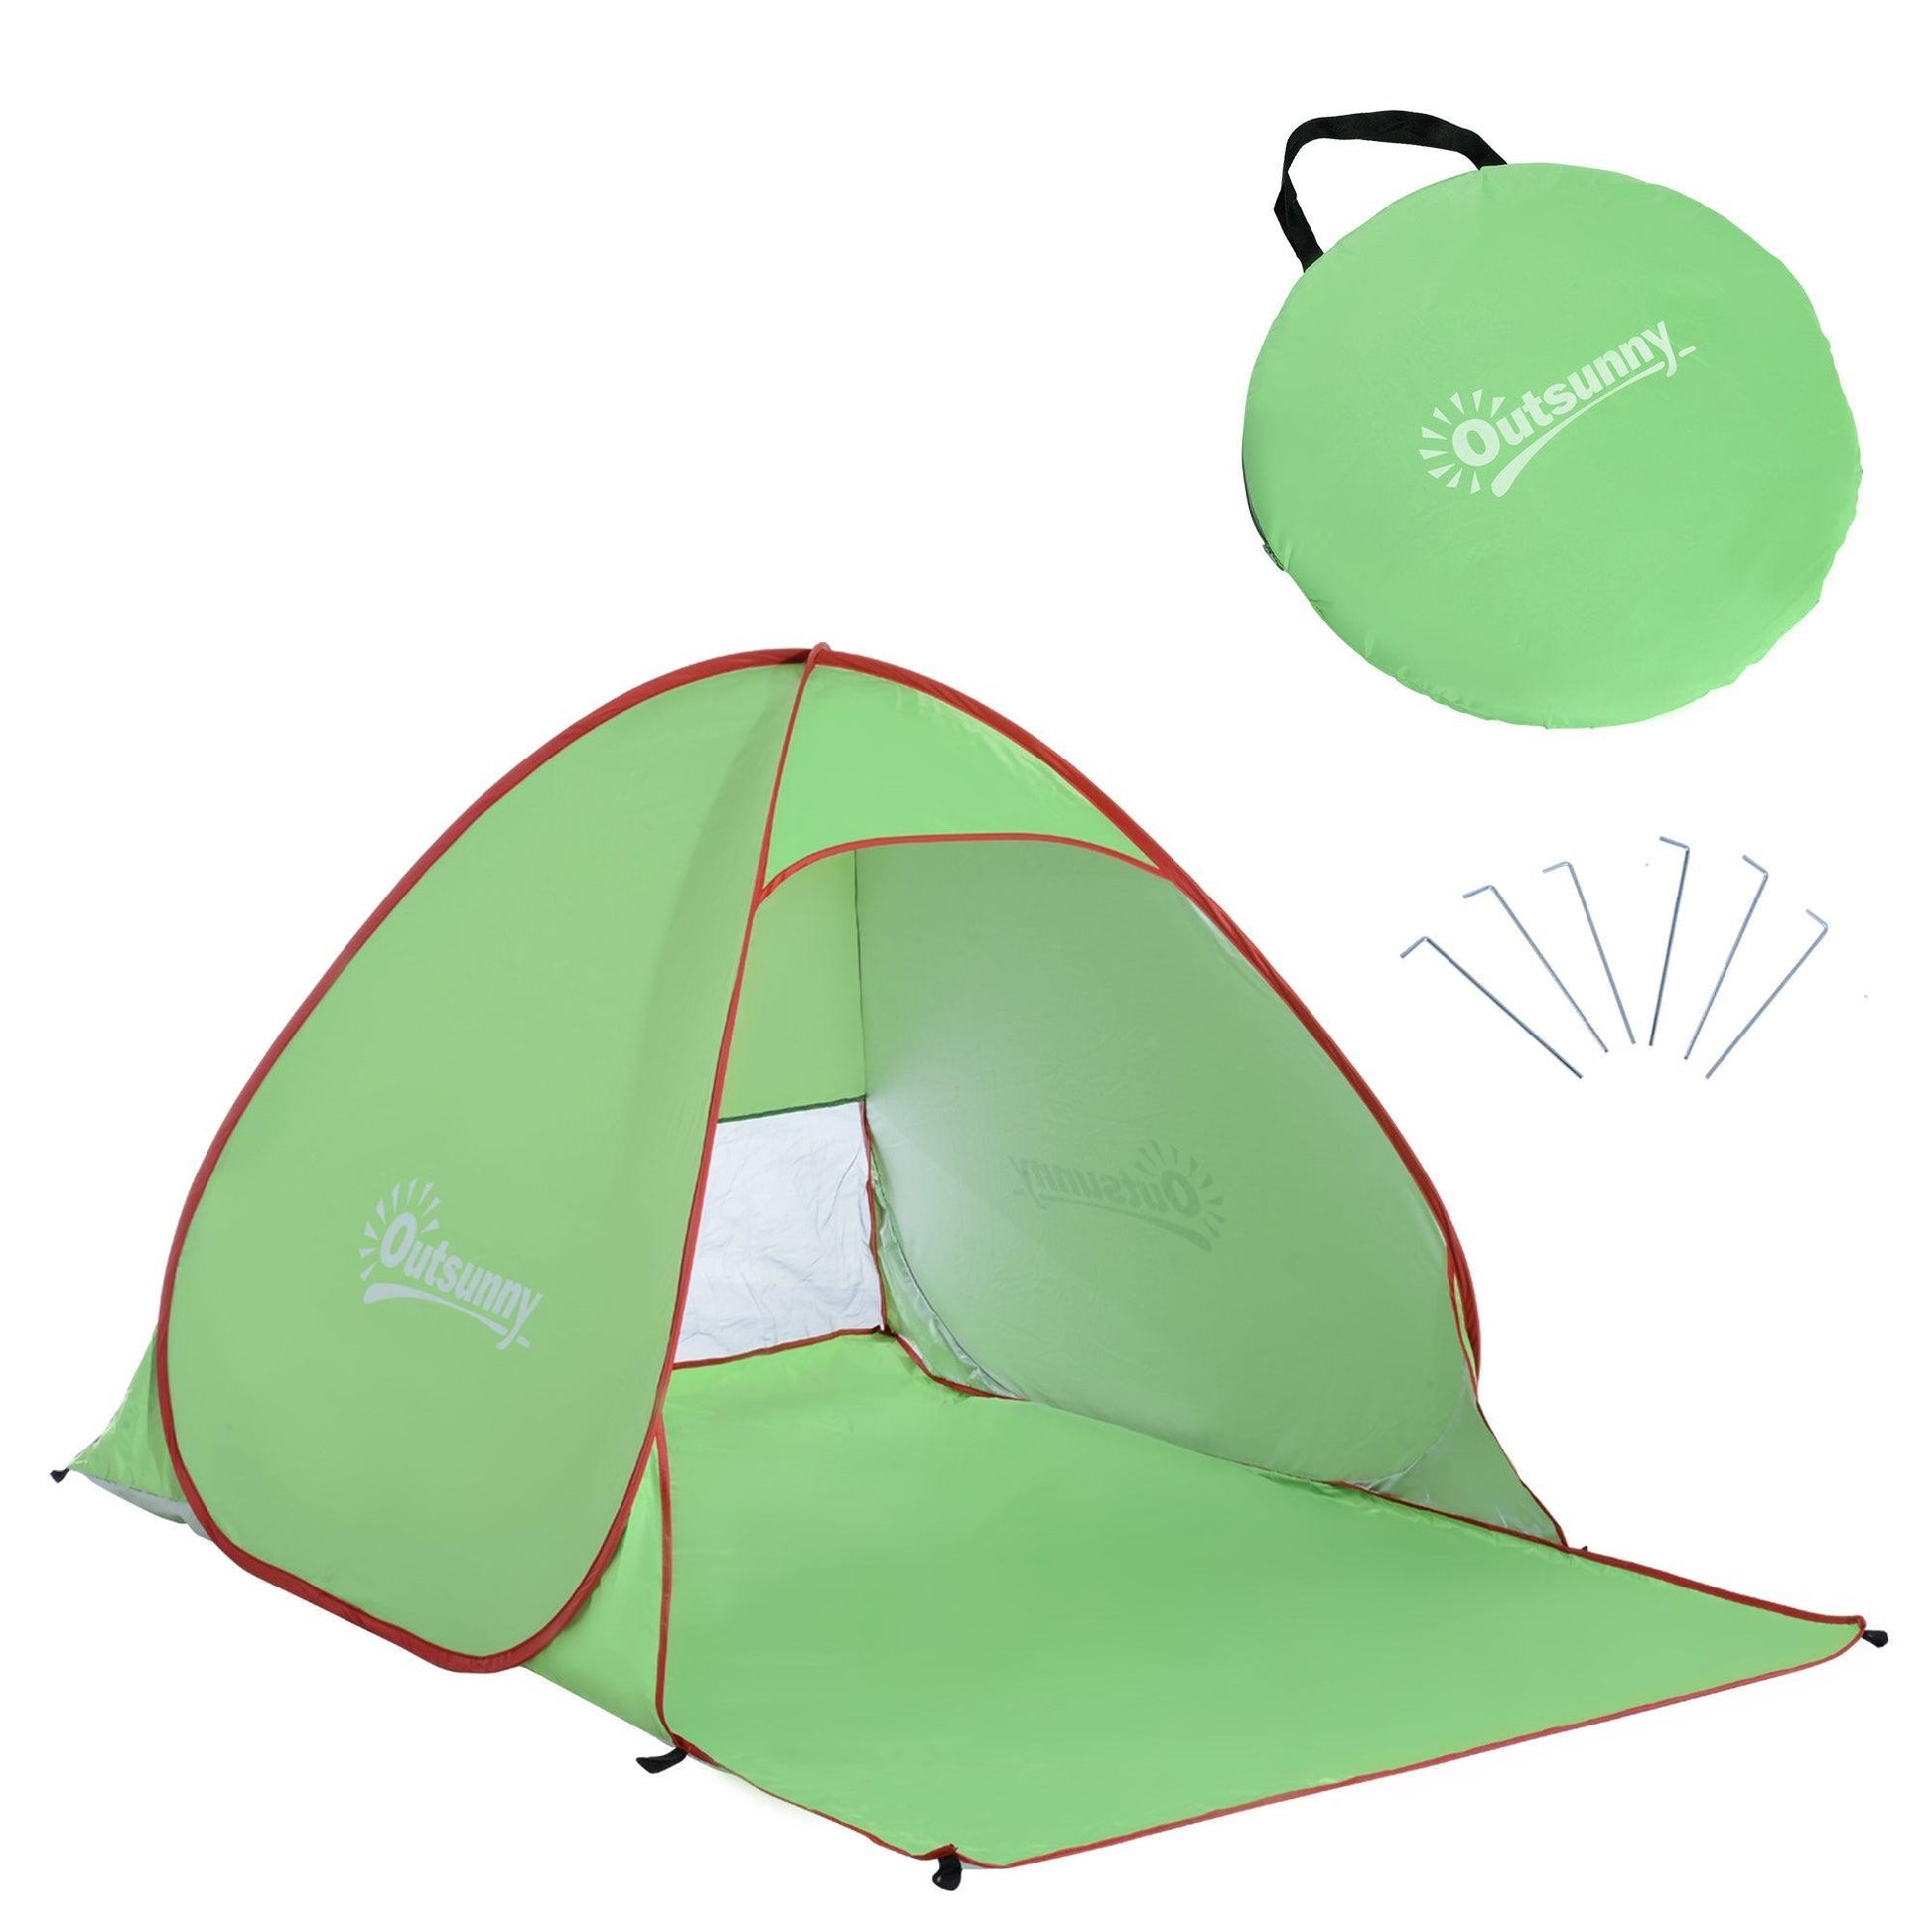 Outsunny Green 2-3 Person Pop-up Tent with UV Protection - ALL4U RETAILER LTD